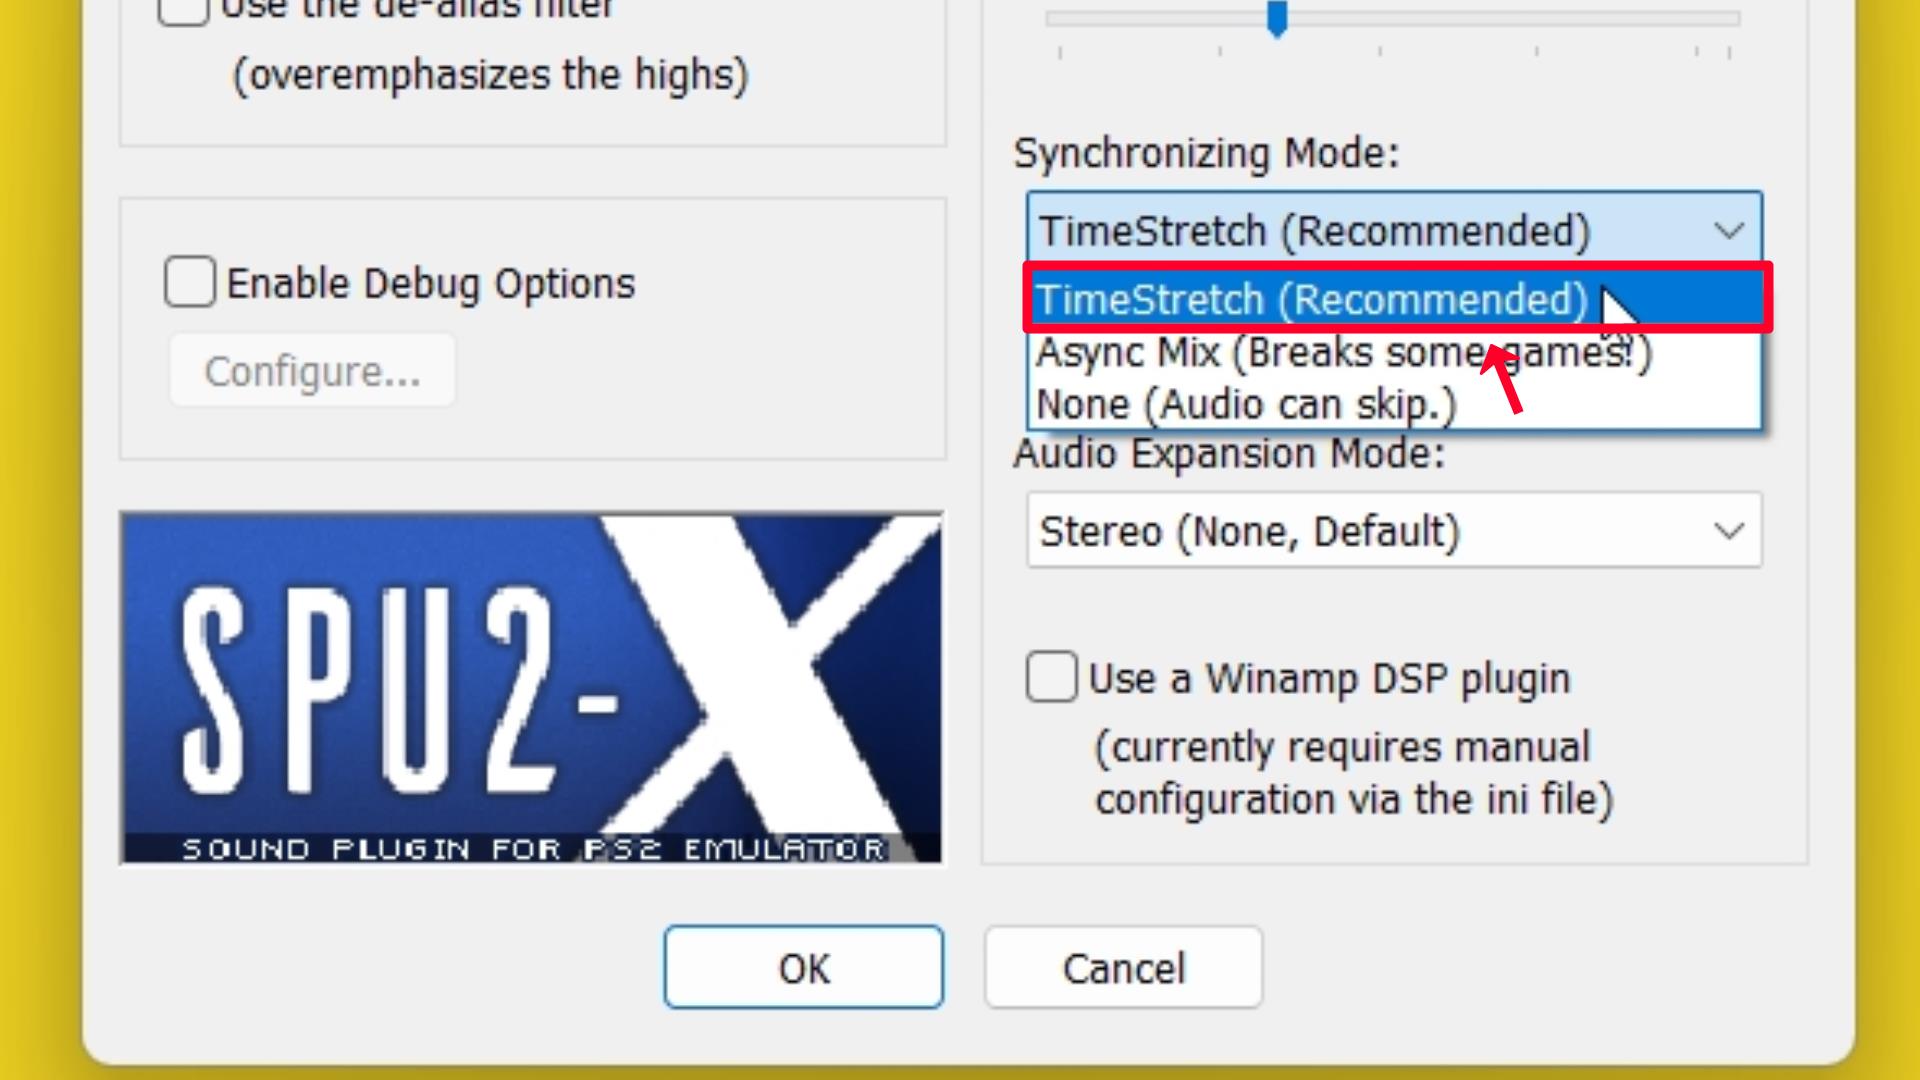 Step 69 Synchronizing Mode TimeStretch Recommended.